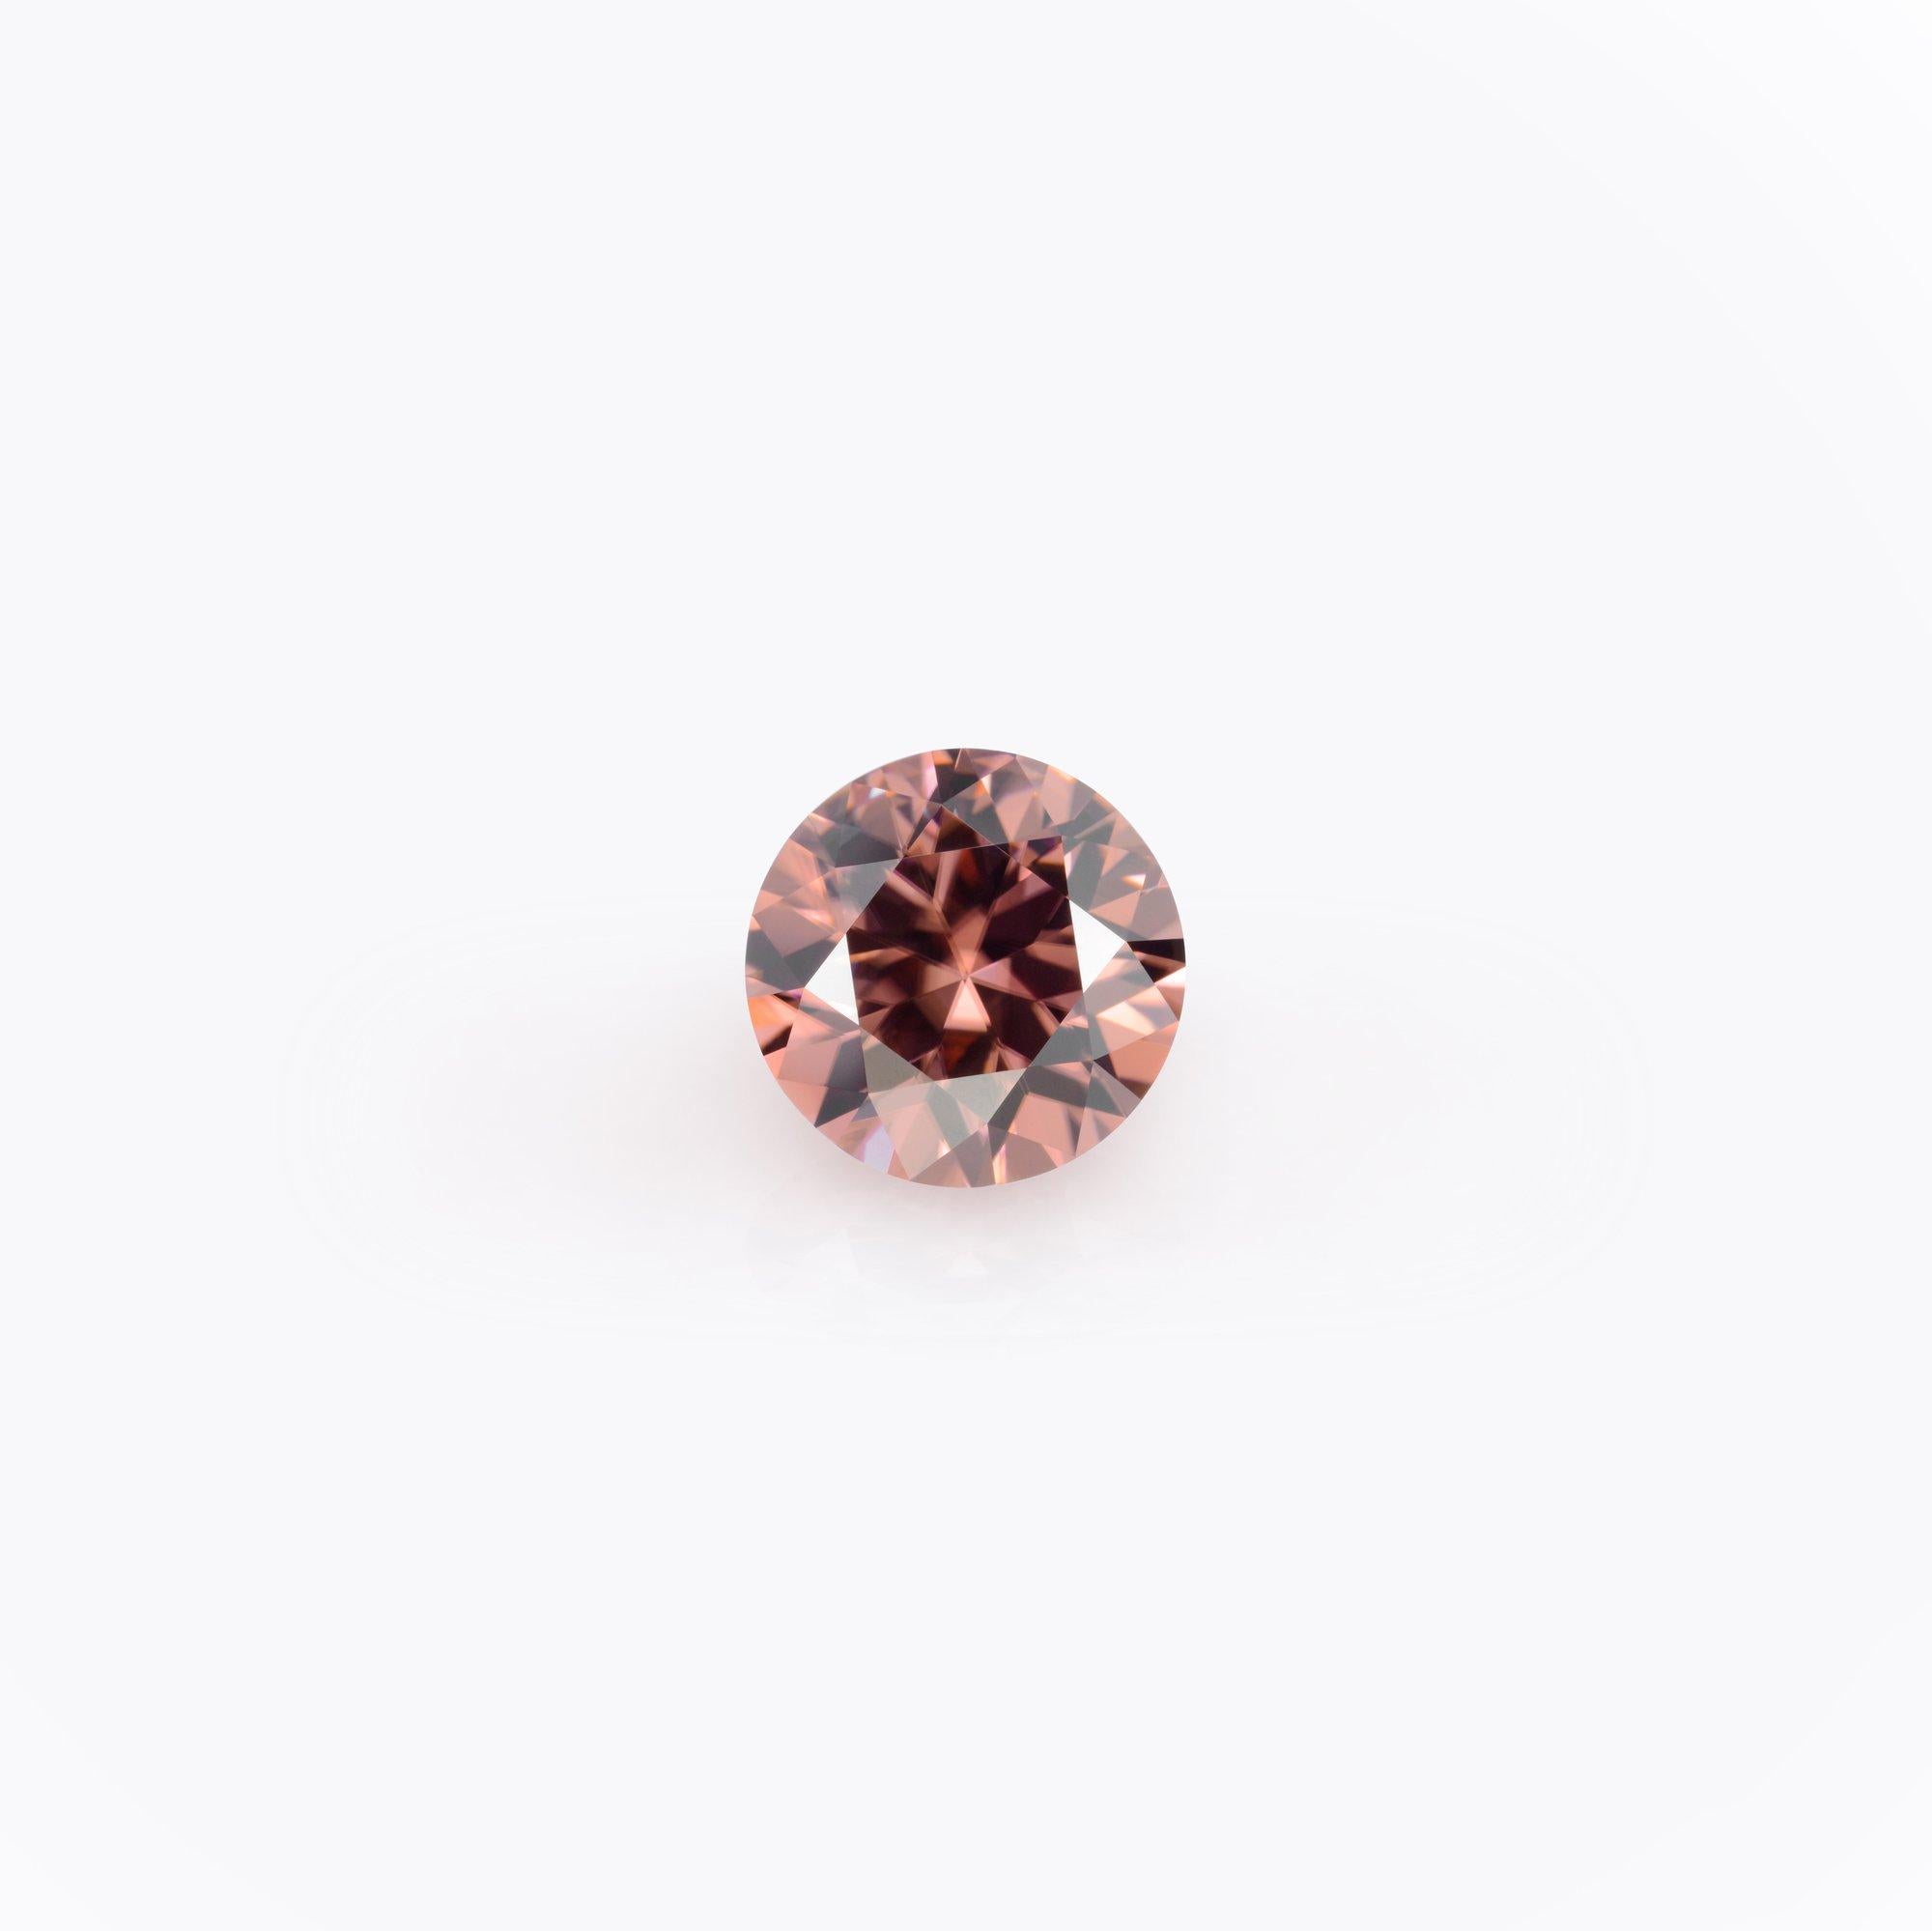 Special 4.80 carat Terracotta Zircon round gem, offered loose to a gem lover.
Returns are accepted and paid by us within 7 days of delivery.
We offer supreme custom jewelry work upon request. Please contact us for more details.
For your convenience